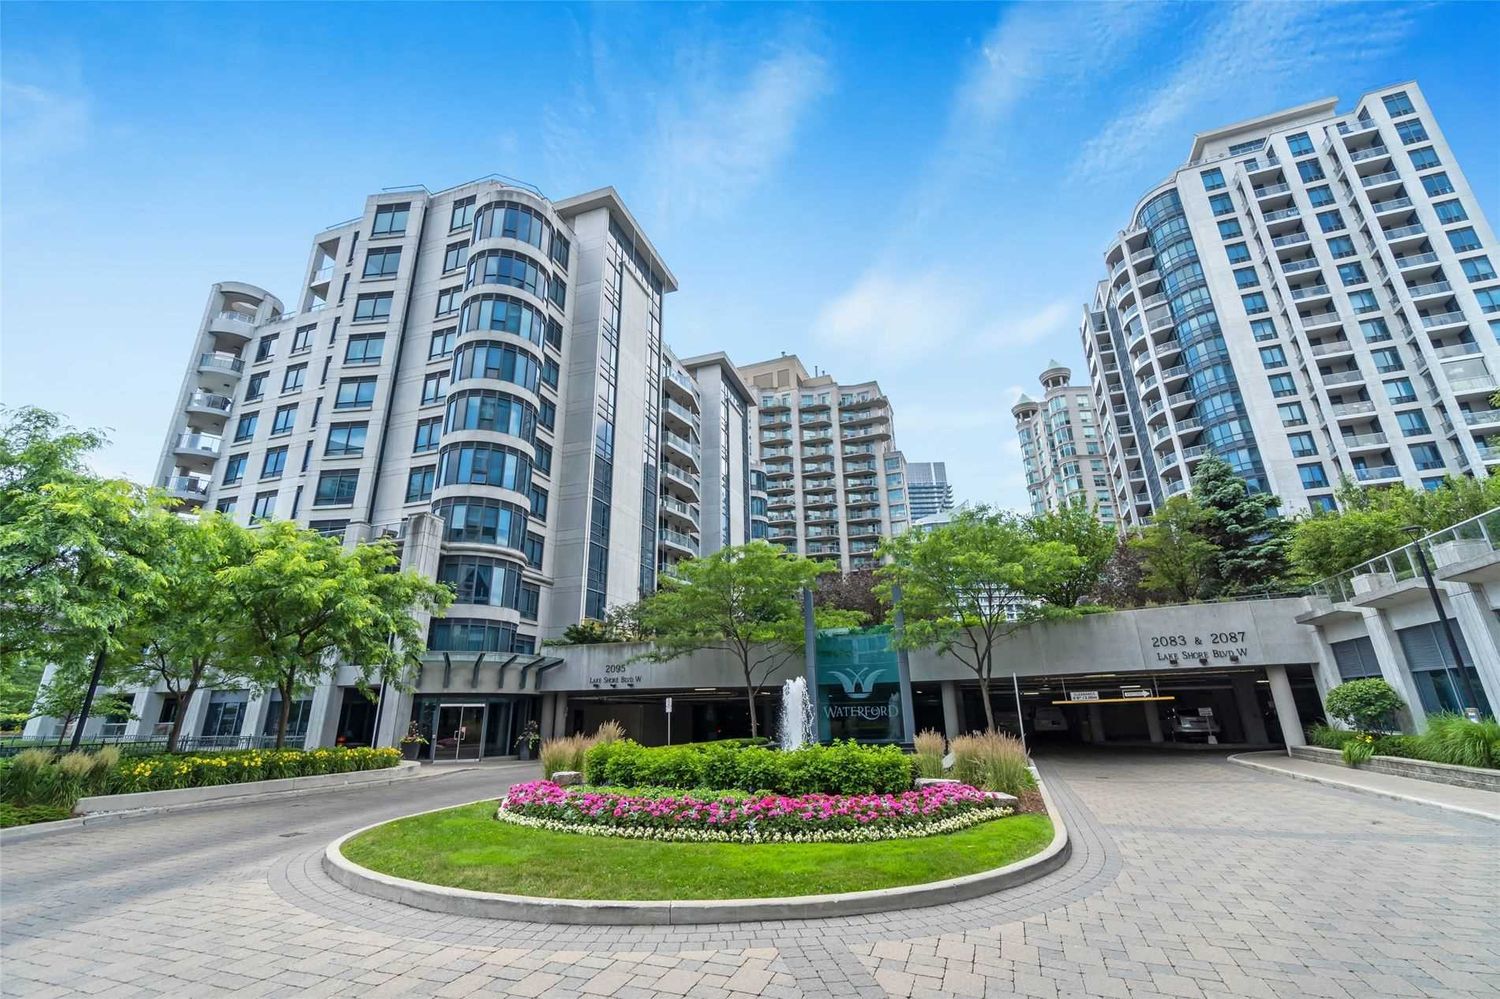 2083-2095 Lake Shore Boulevard W. Waterford Towers Condos is located in  Etobicoke, Toronto - image #1 of 2